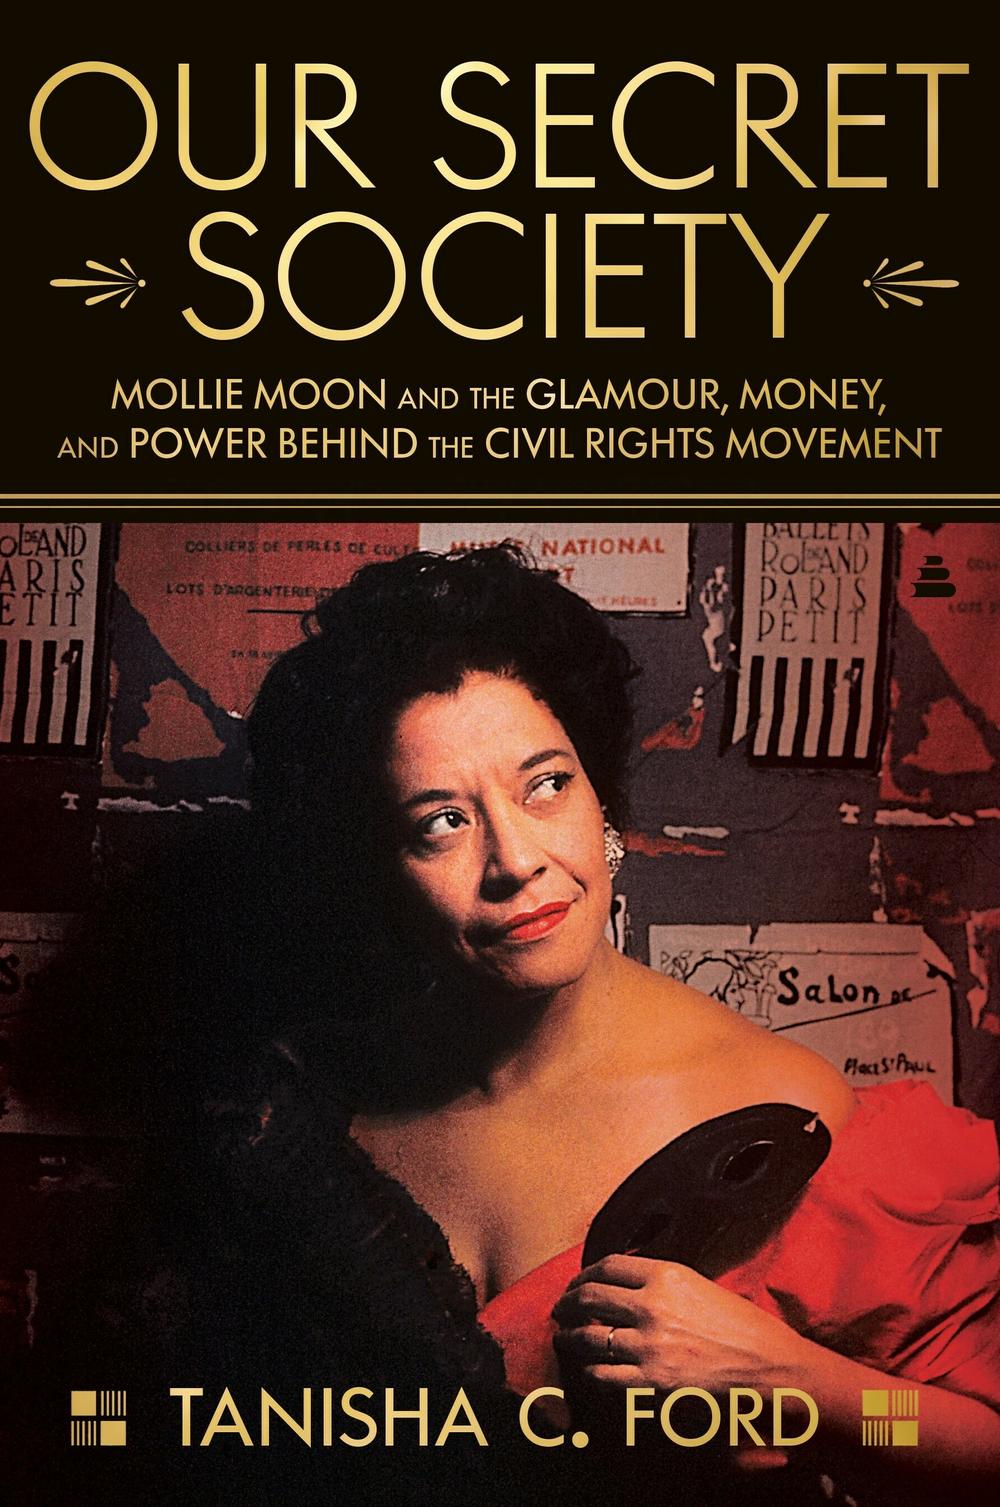 <em>Our Secret Society: Mollie Moon and the Glamour, Money, and Power Behind the Civil Rights Movement,</em> by Tanisha Ford